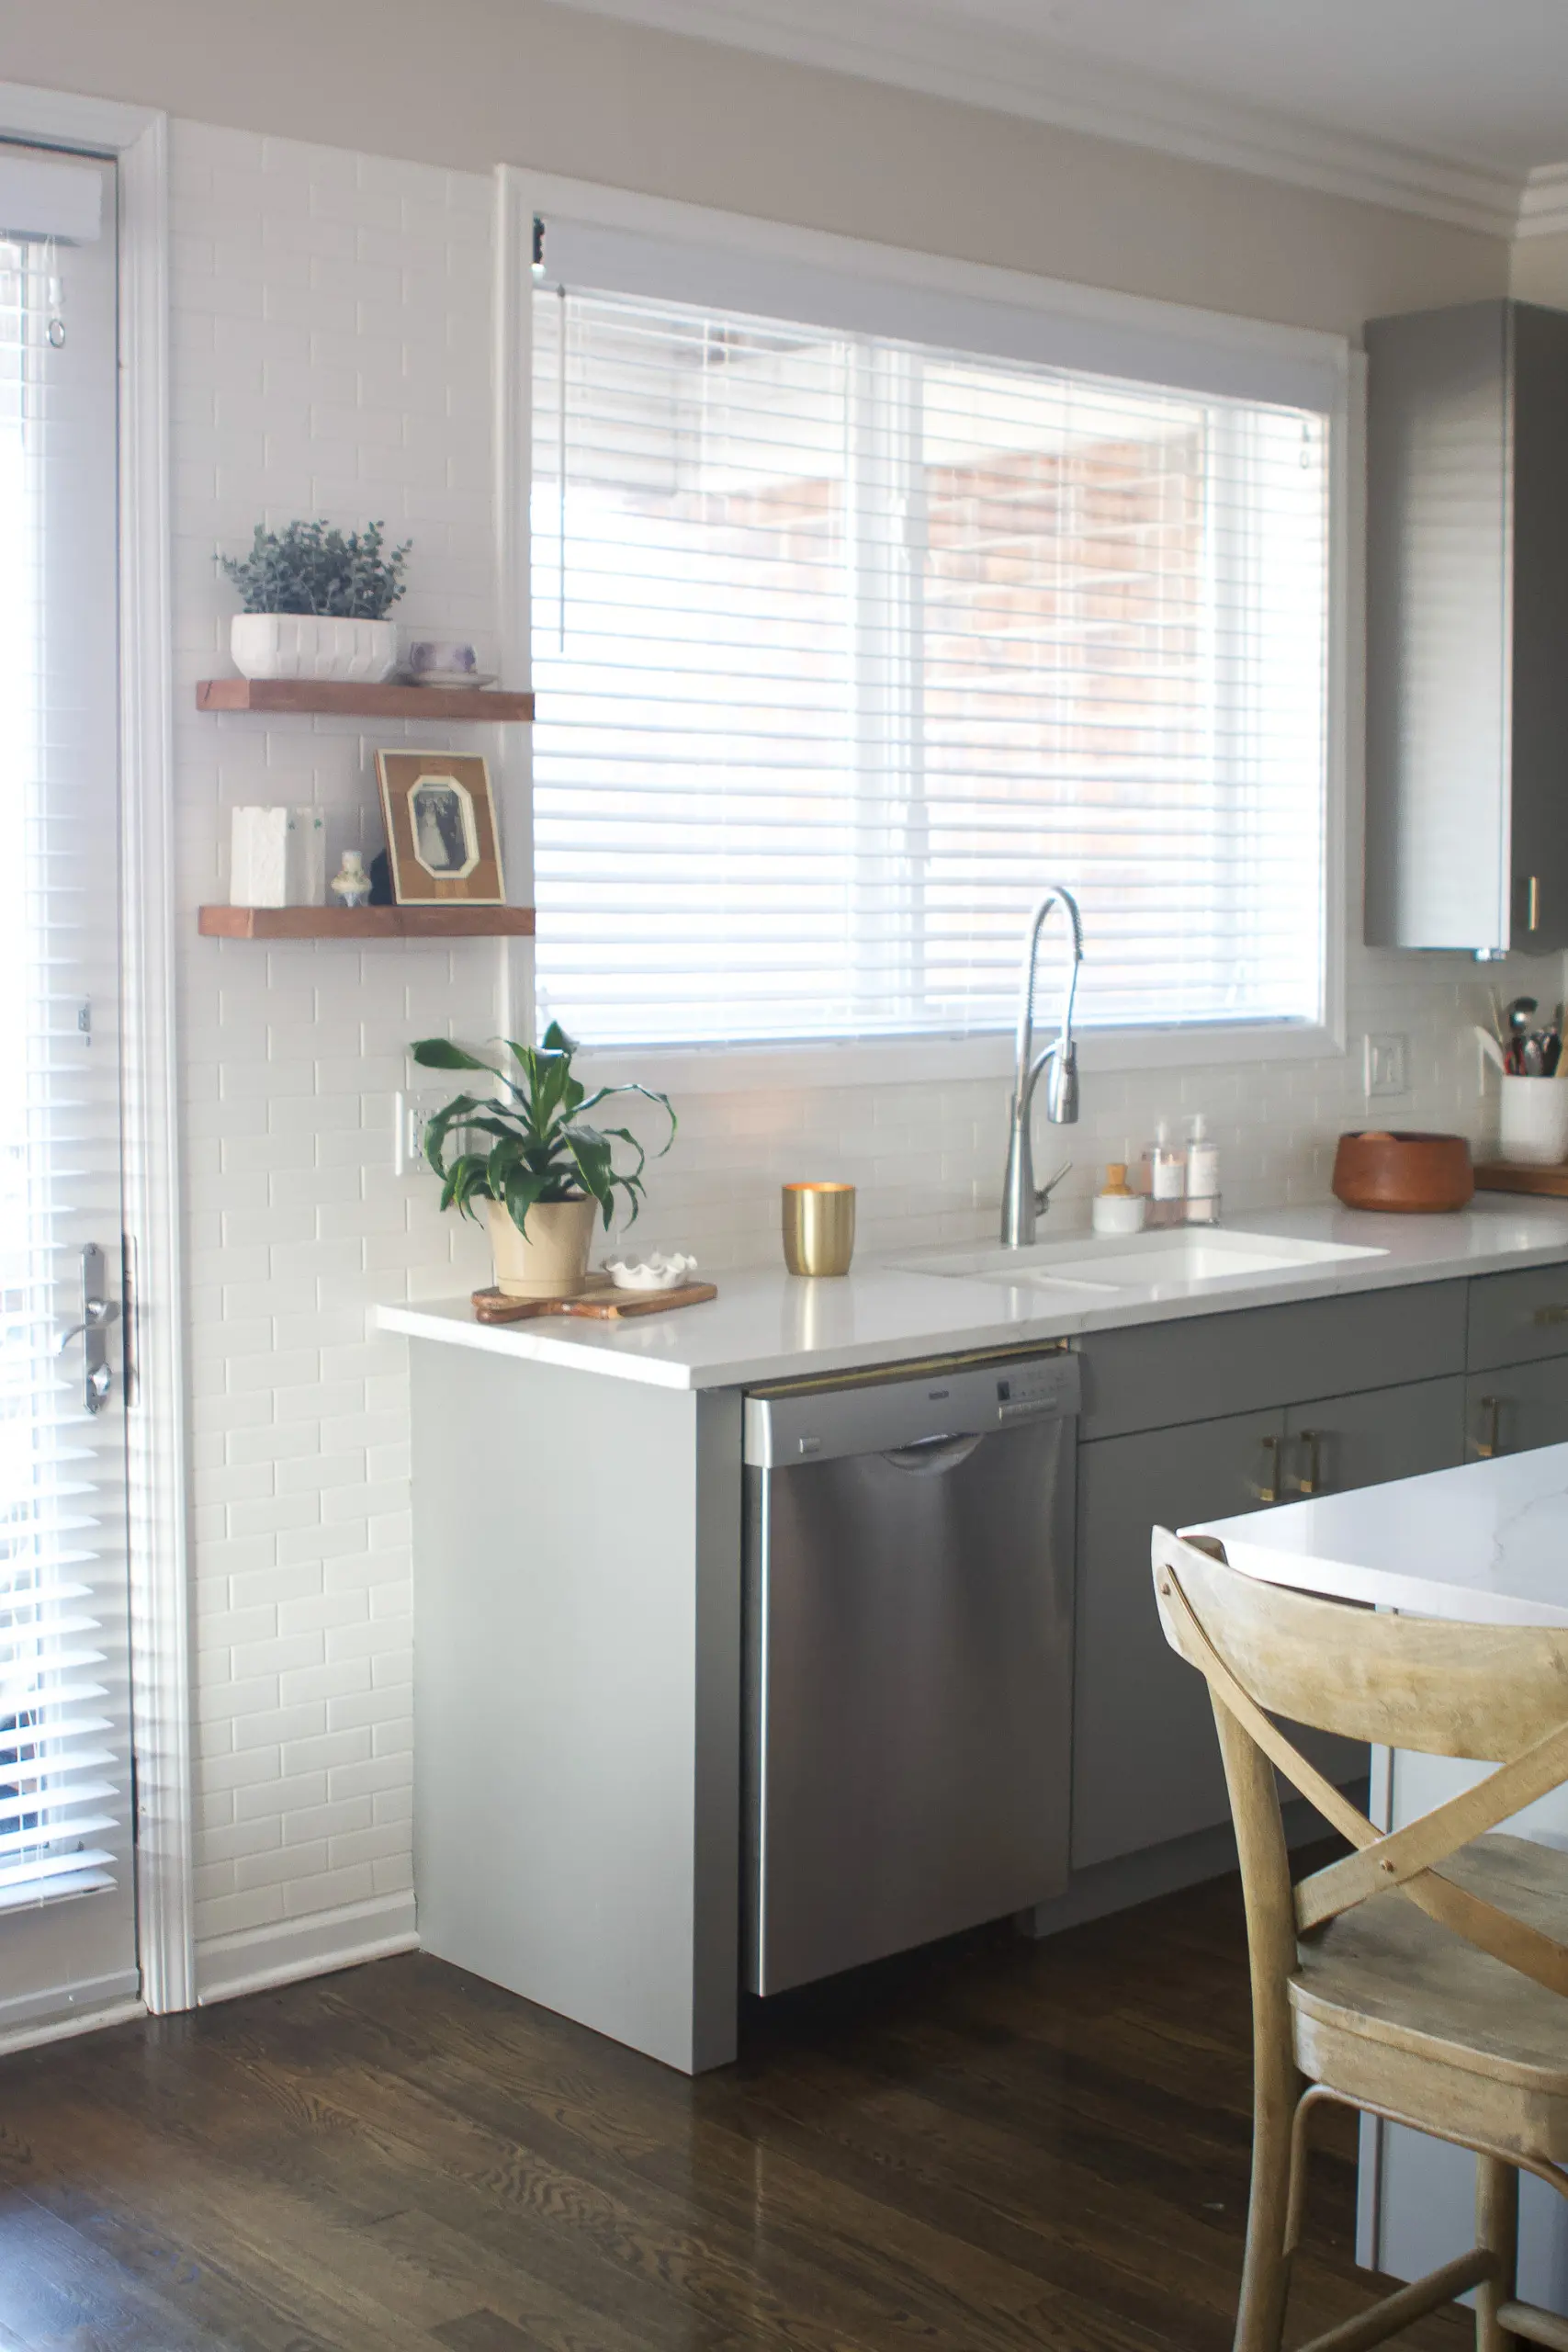 How to fix a common tiling mistake on your kitchen backsplash